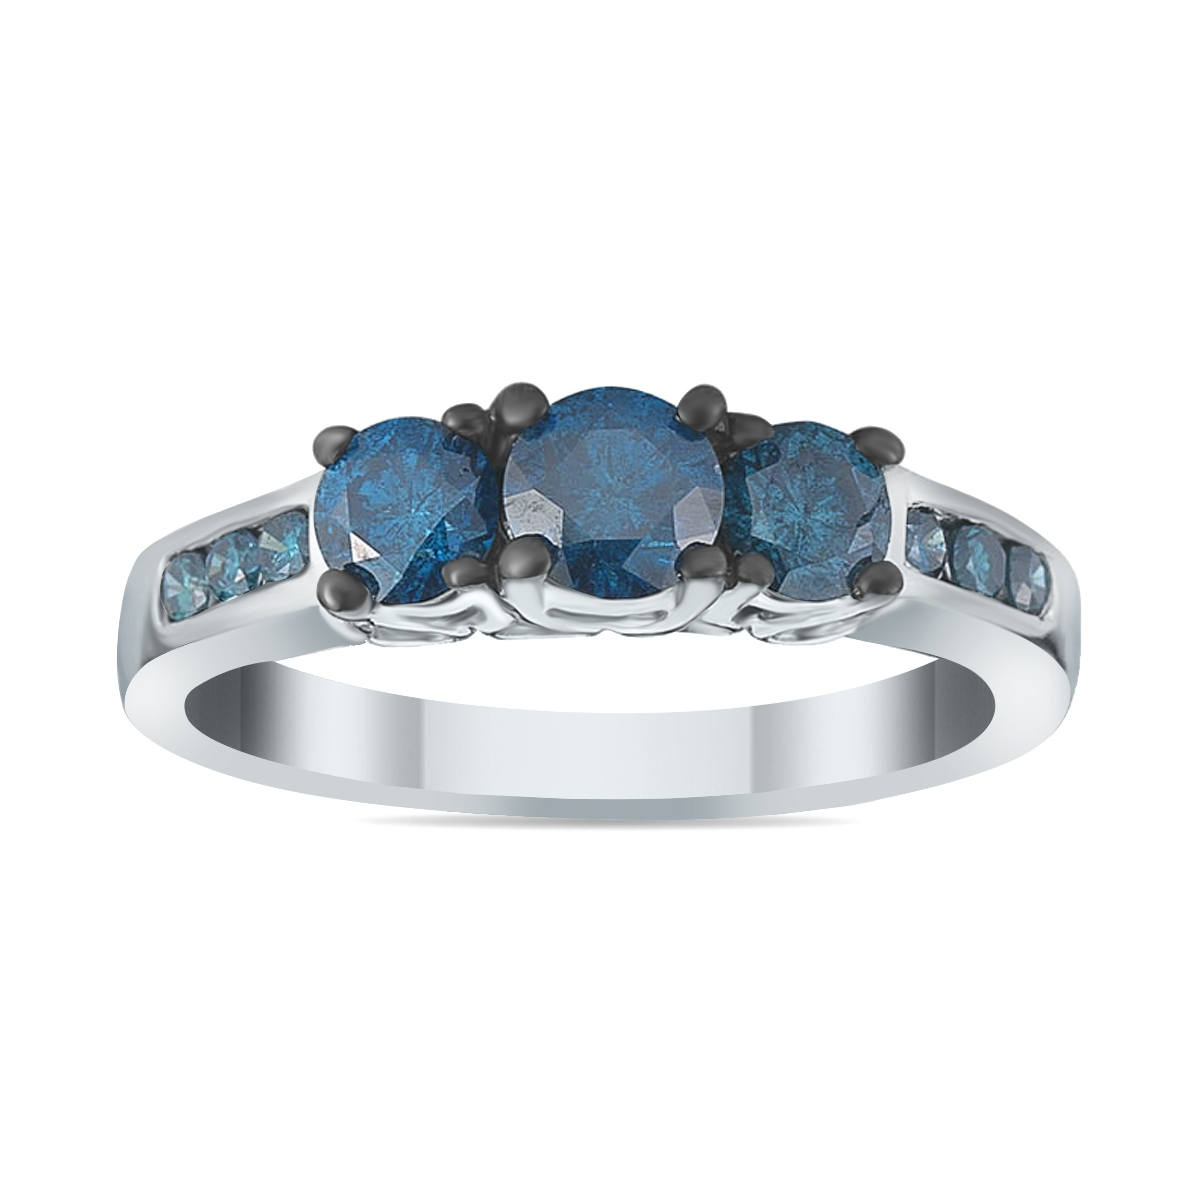 Image of 1 1/10 Carat TW Natural Blue Diamond Three Stone Ring in 10K White Gold